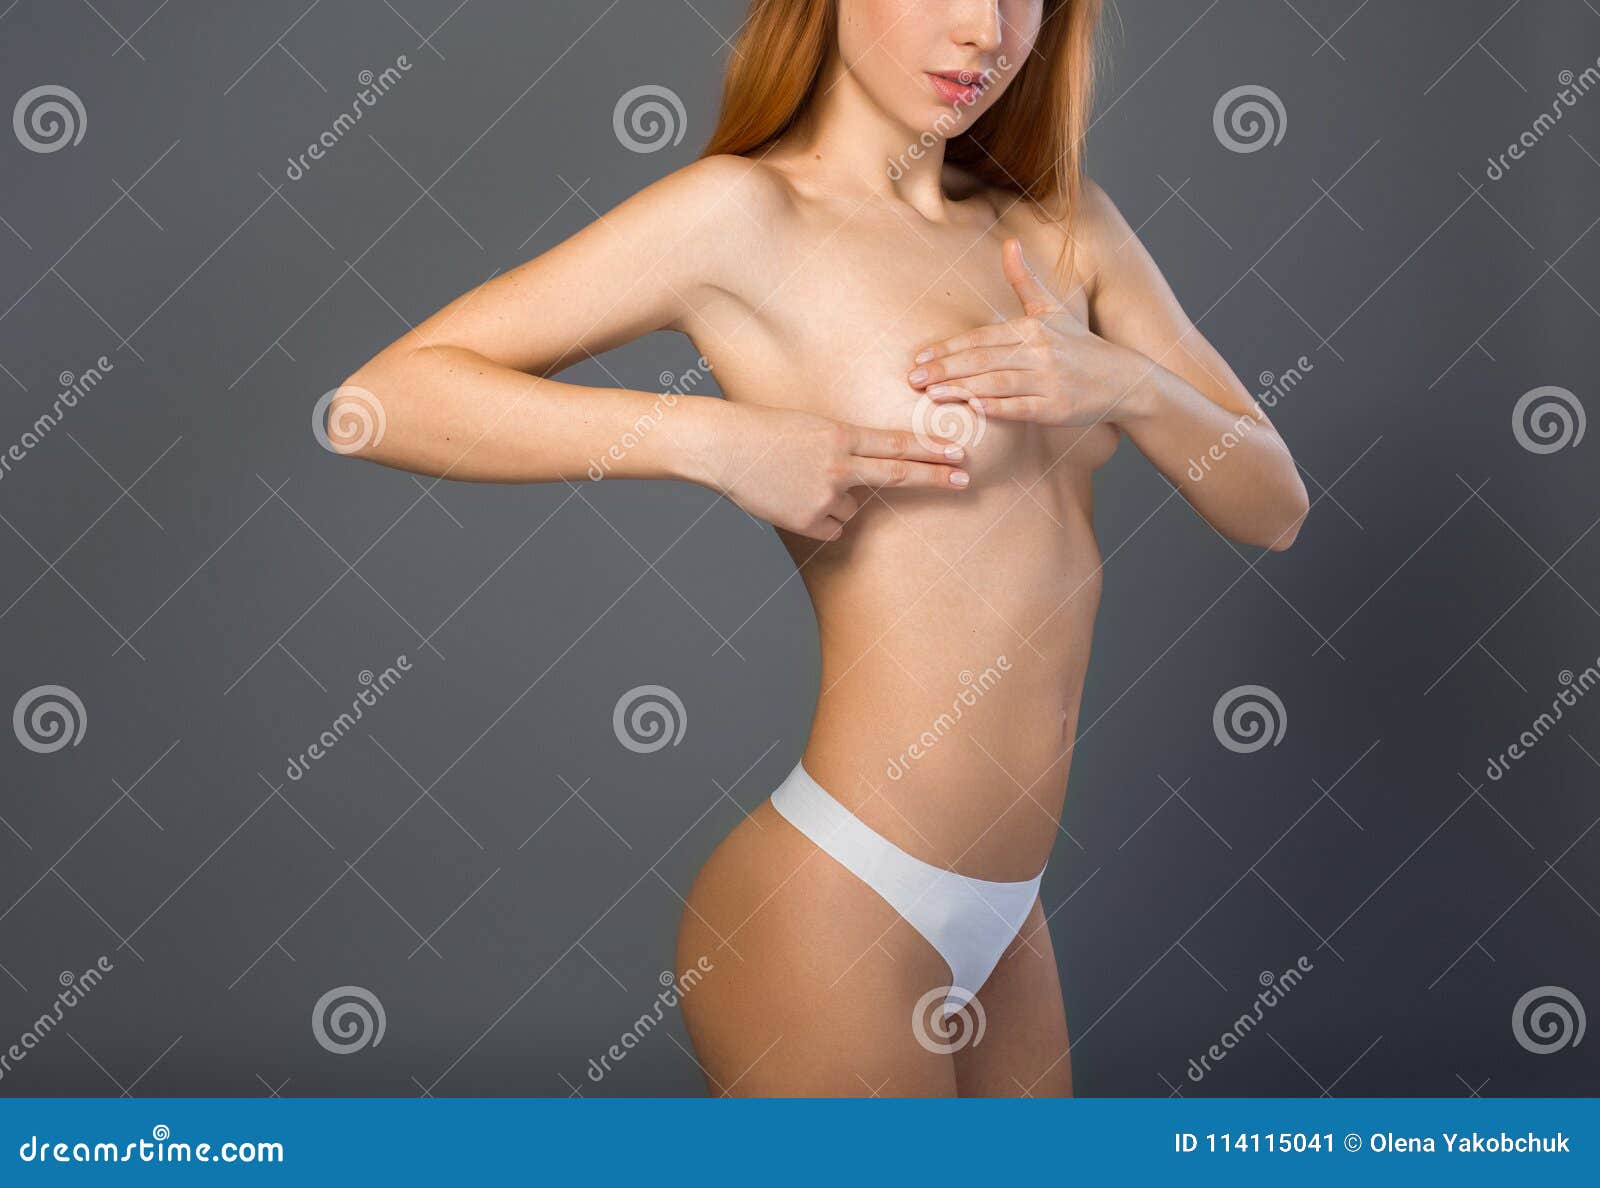 Naked Adult Girl Touching Her Chest for Medical Purpose Stock Image - Image  of chest, care: 114115041